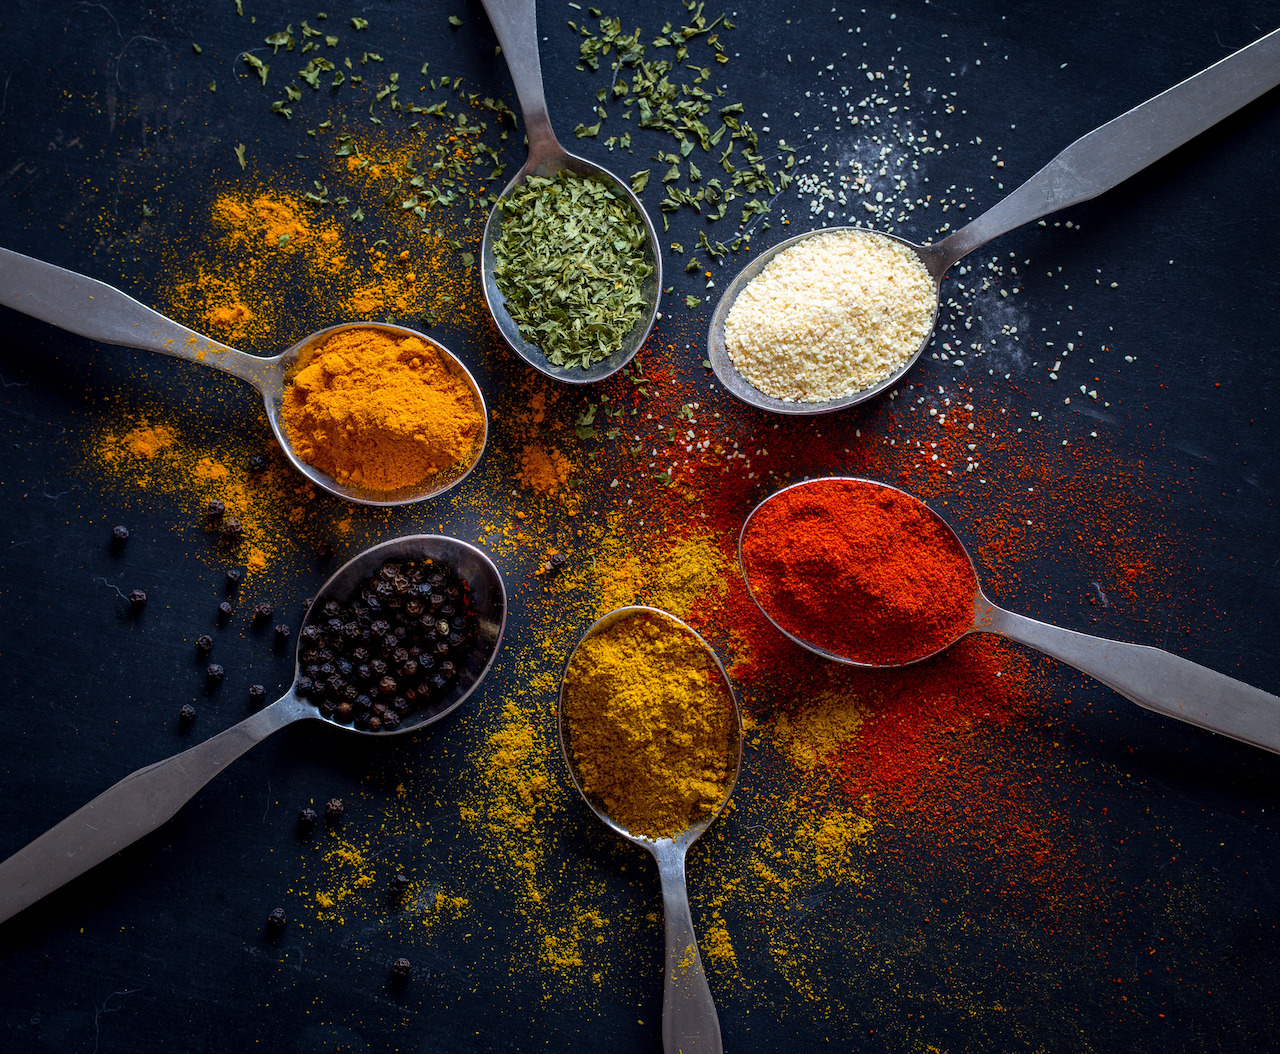 How the world’s top chefs use spices